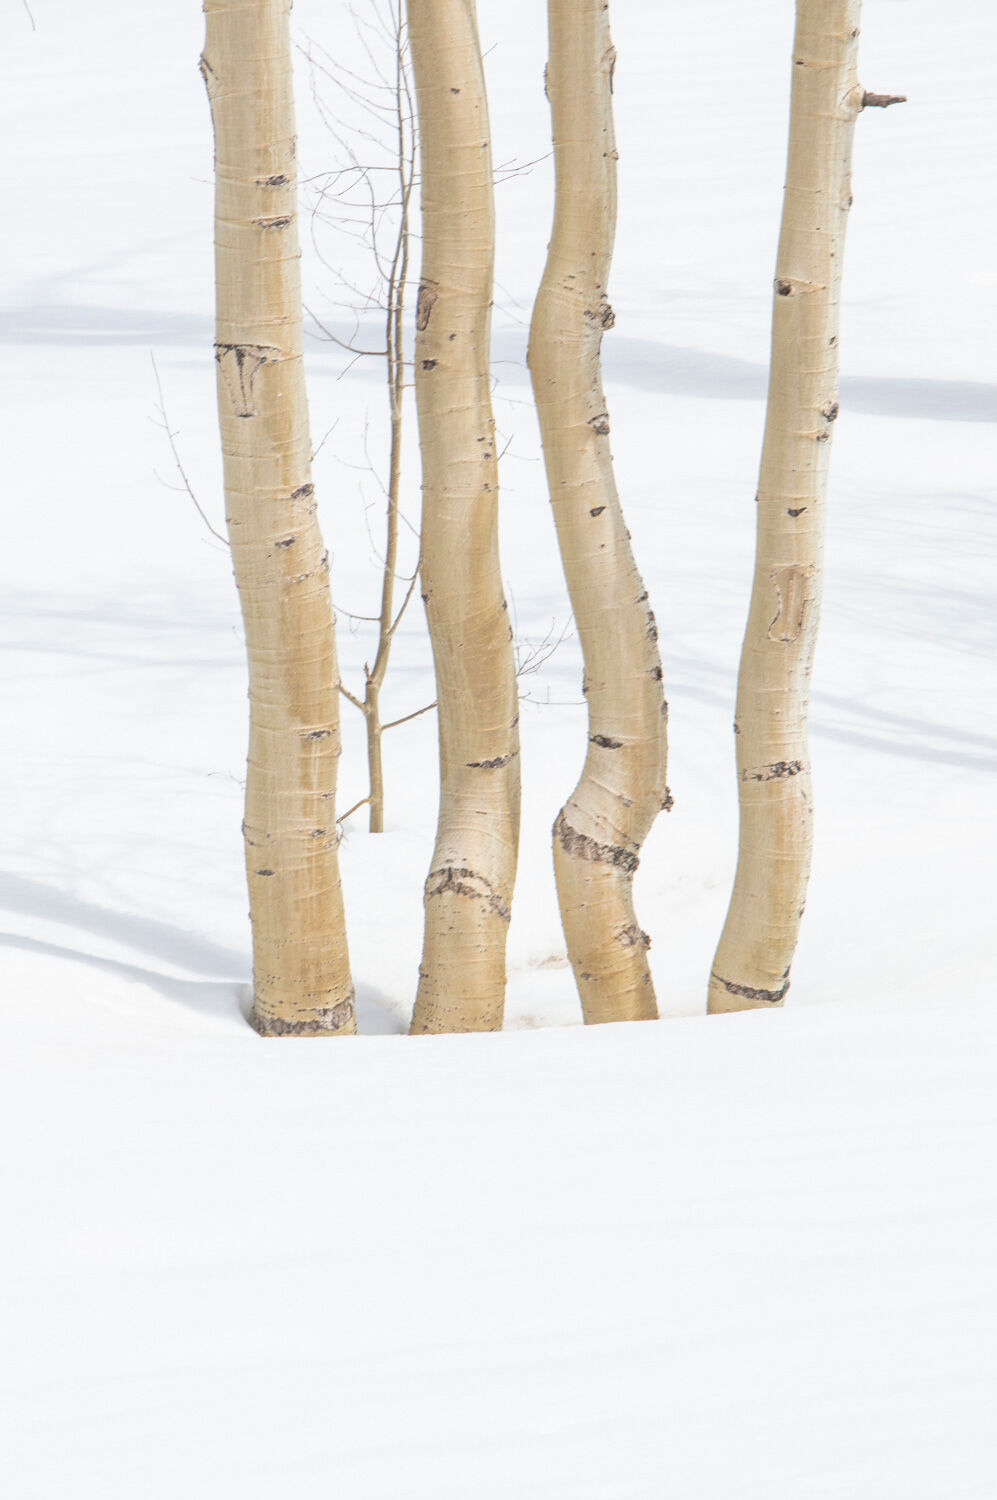 Buy pictures of aspen trees for your home or office.